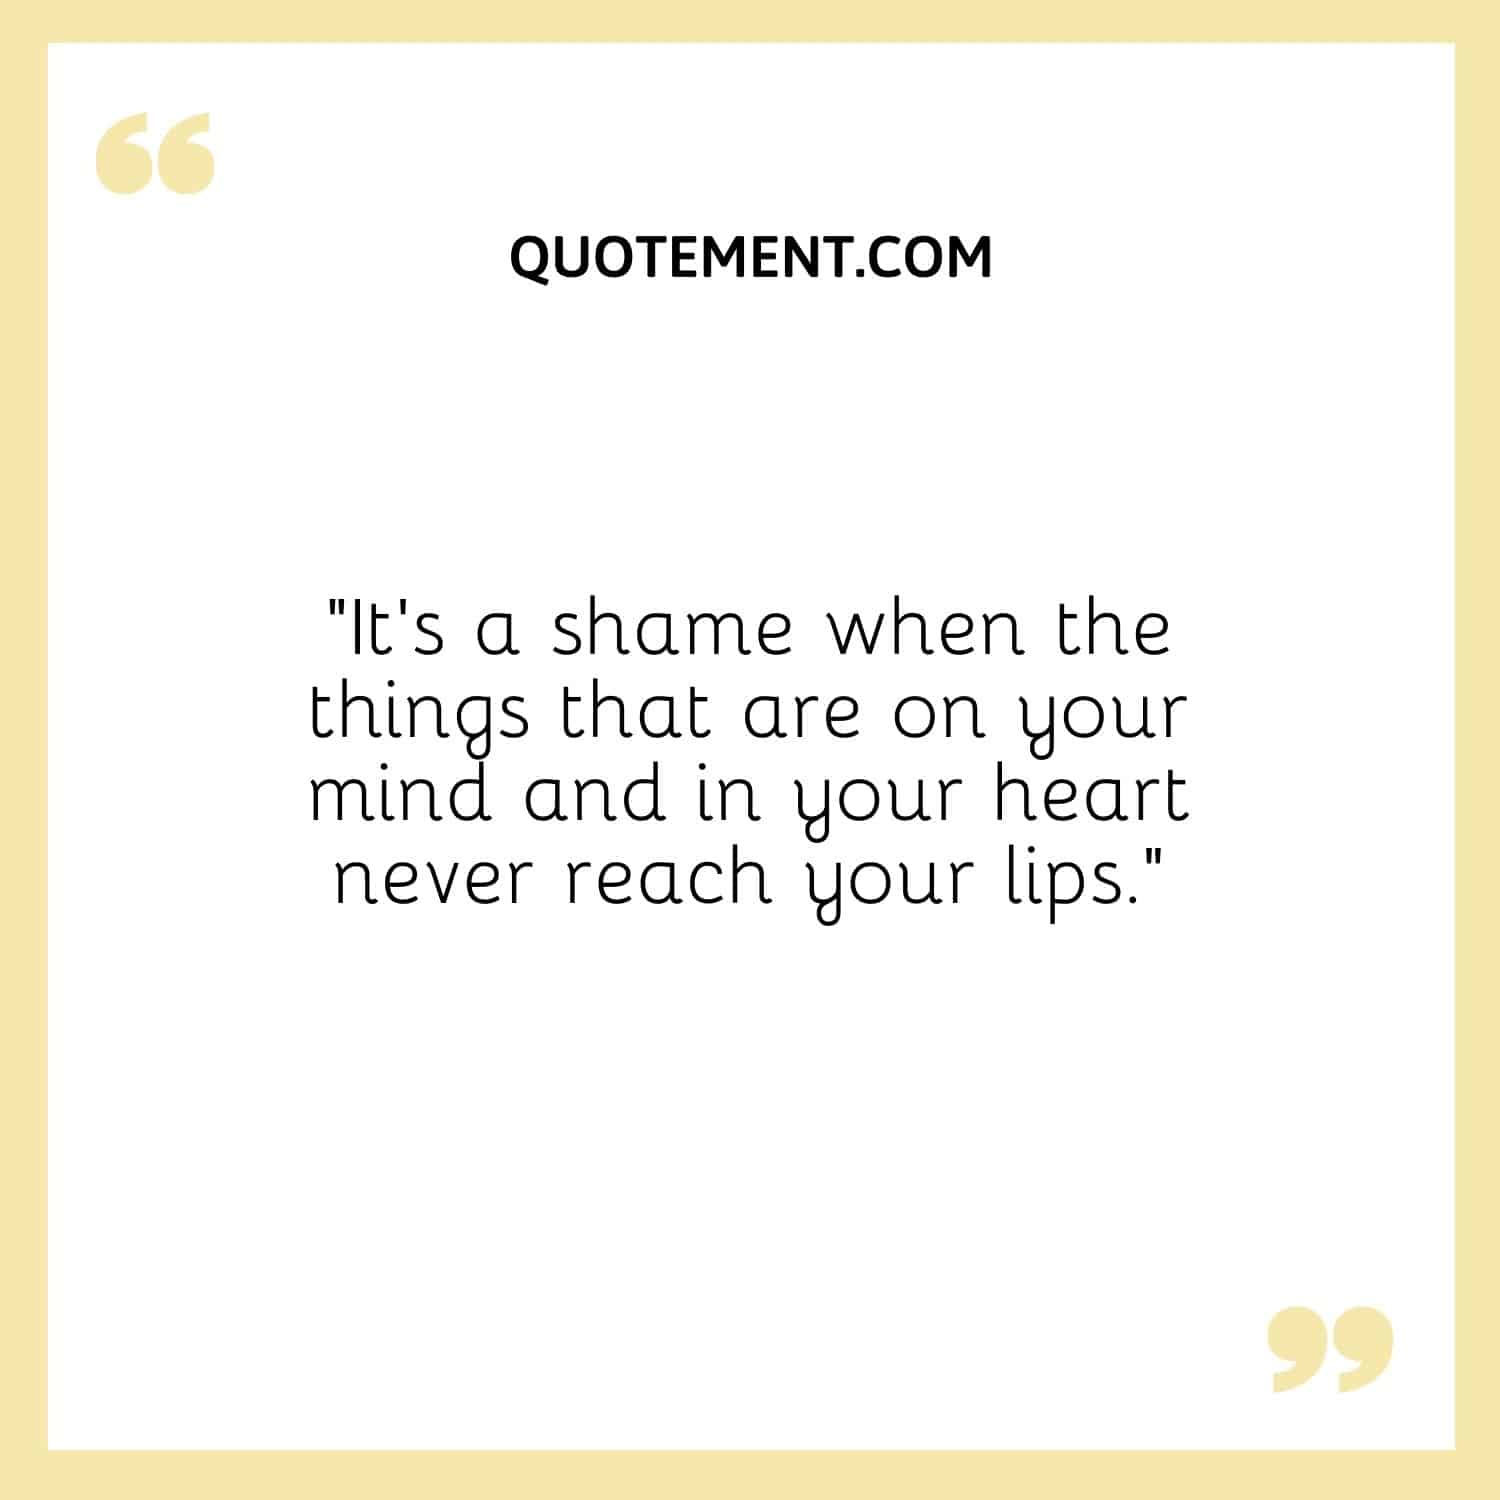 “It’s a shame when the things that are on your mind and in your heart never reach your lips.”